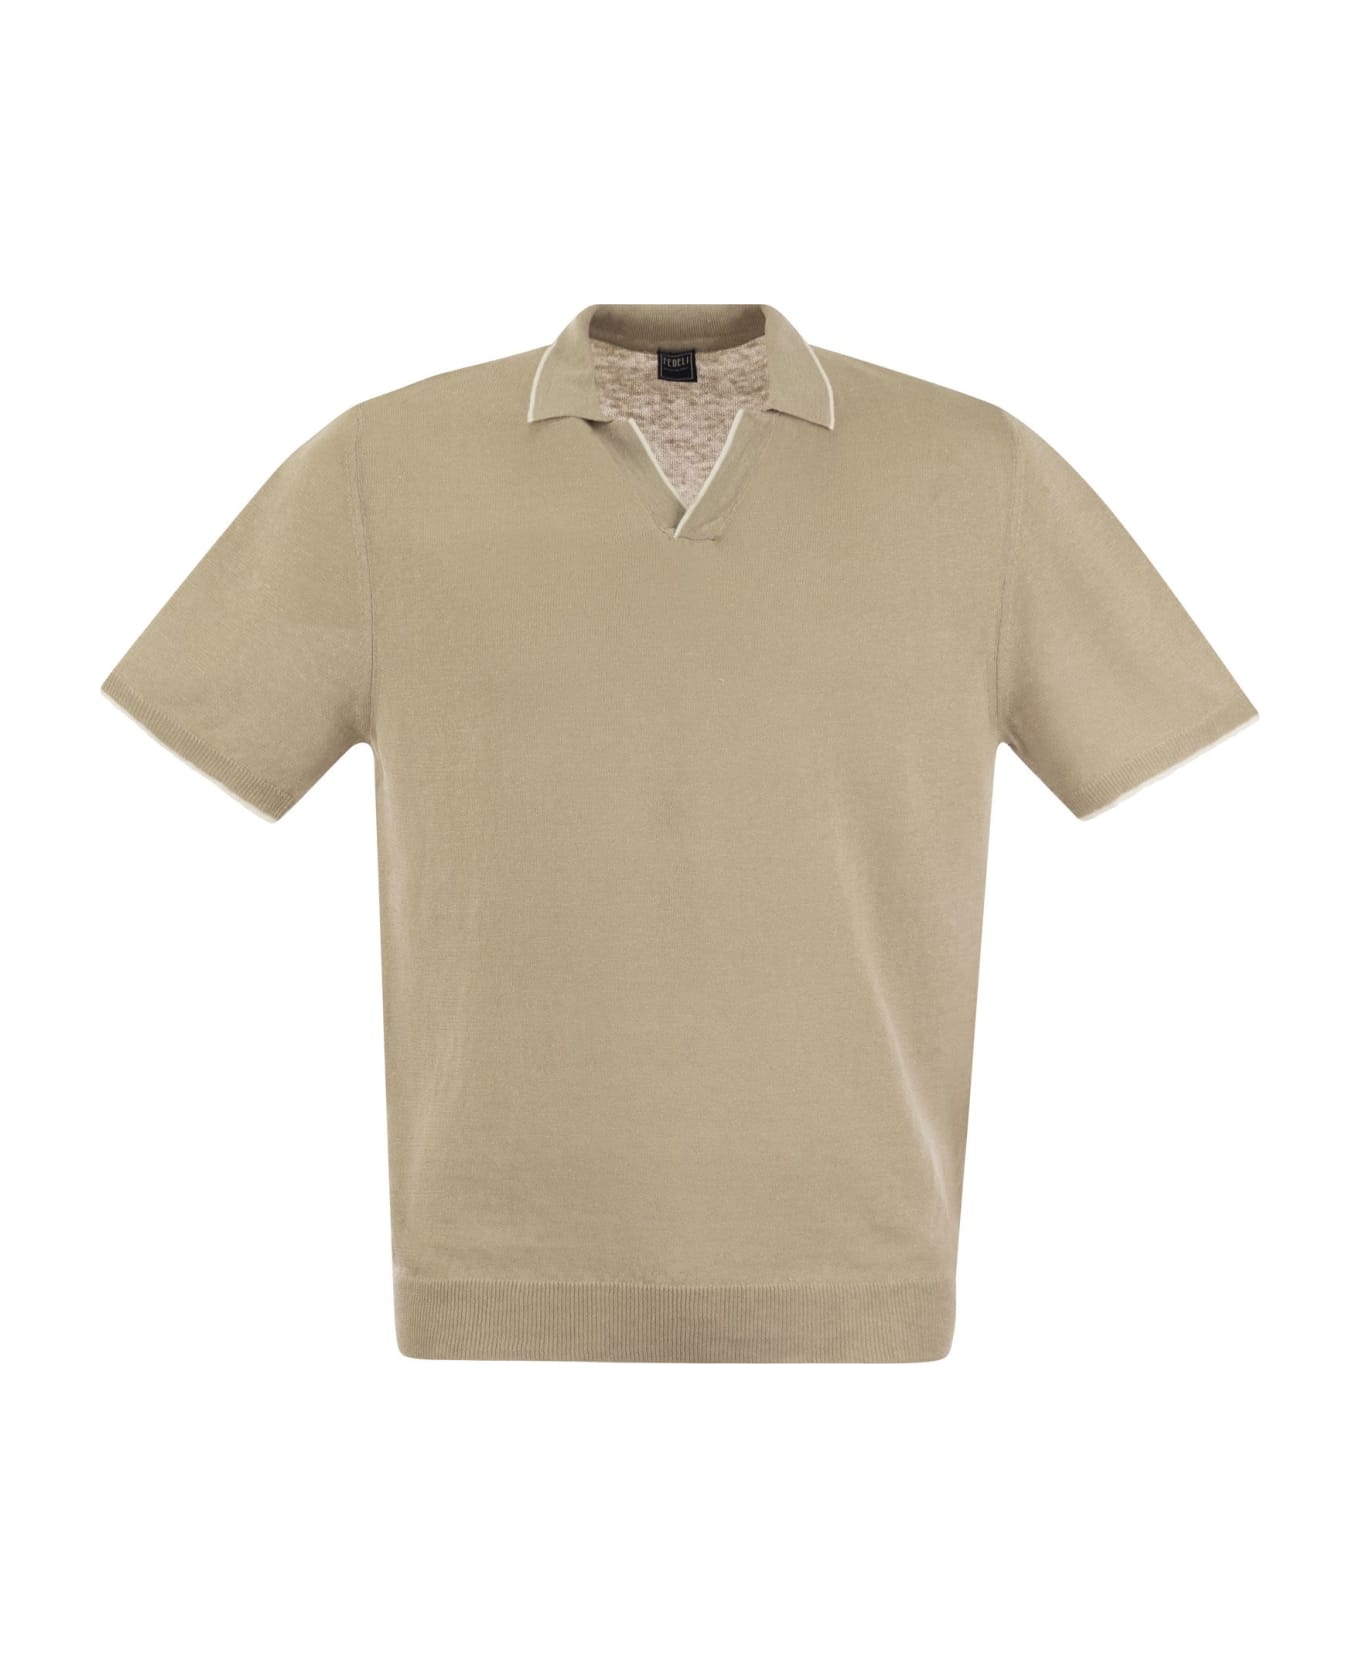 Fedeli Polo Shirt With Open Collar In Linen And Cotton - Beige ポロシャツ